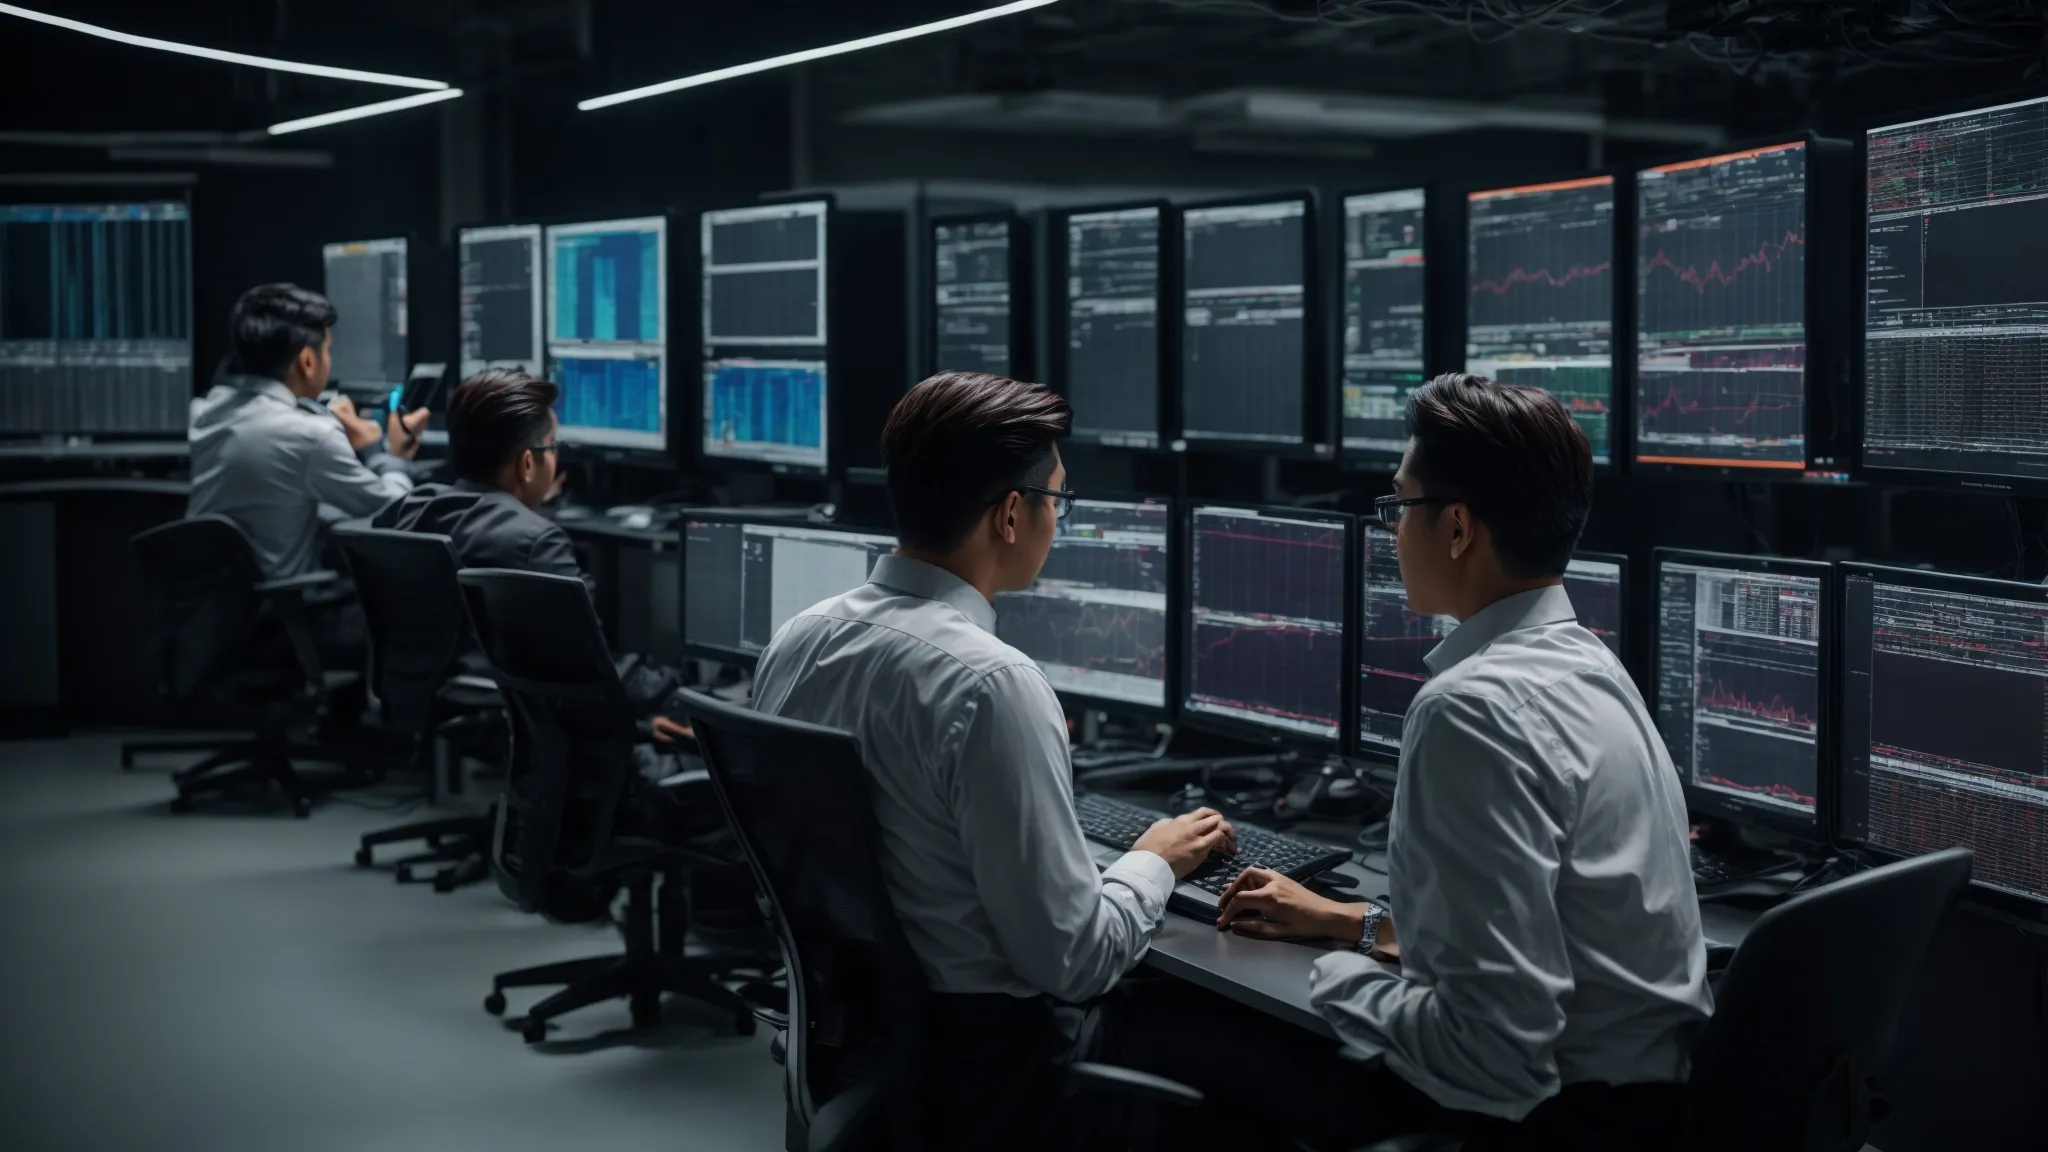 a diverse team of analysts intently studies graphs on computer monitors in a modern data center.